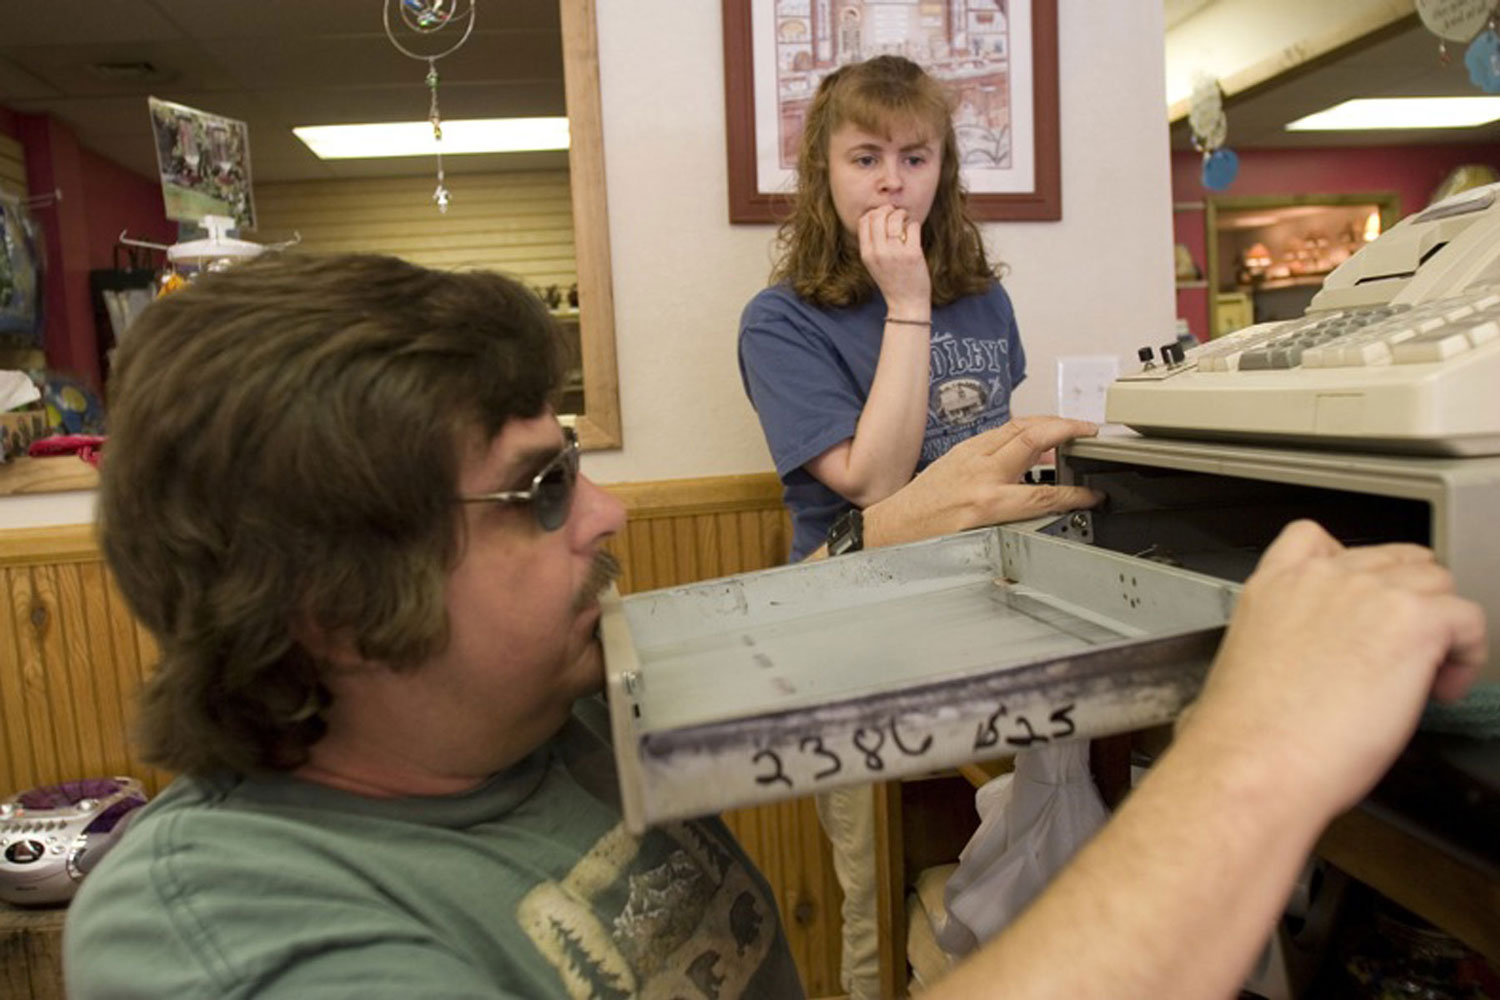 A man in sunglasses props open a drawer with his chin while a woman looks on with concern